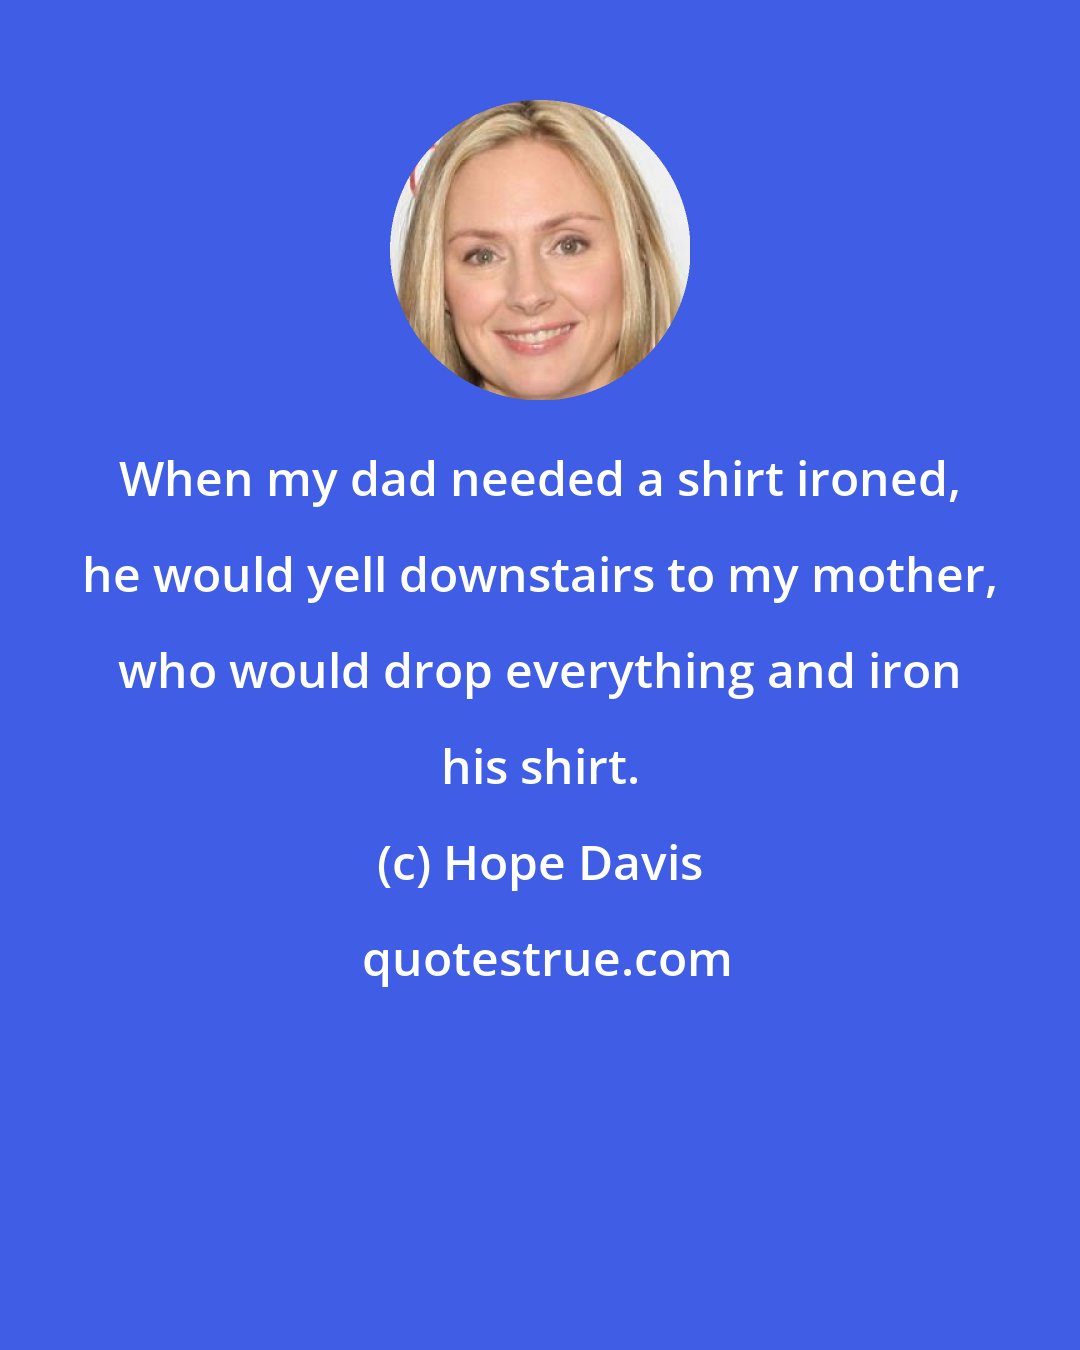 Hope Davis: When my dad needed a shirt ironed, he would yell downstairs to my mother, who would drop everything and iron his shirt.